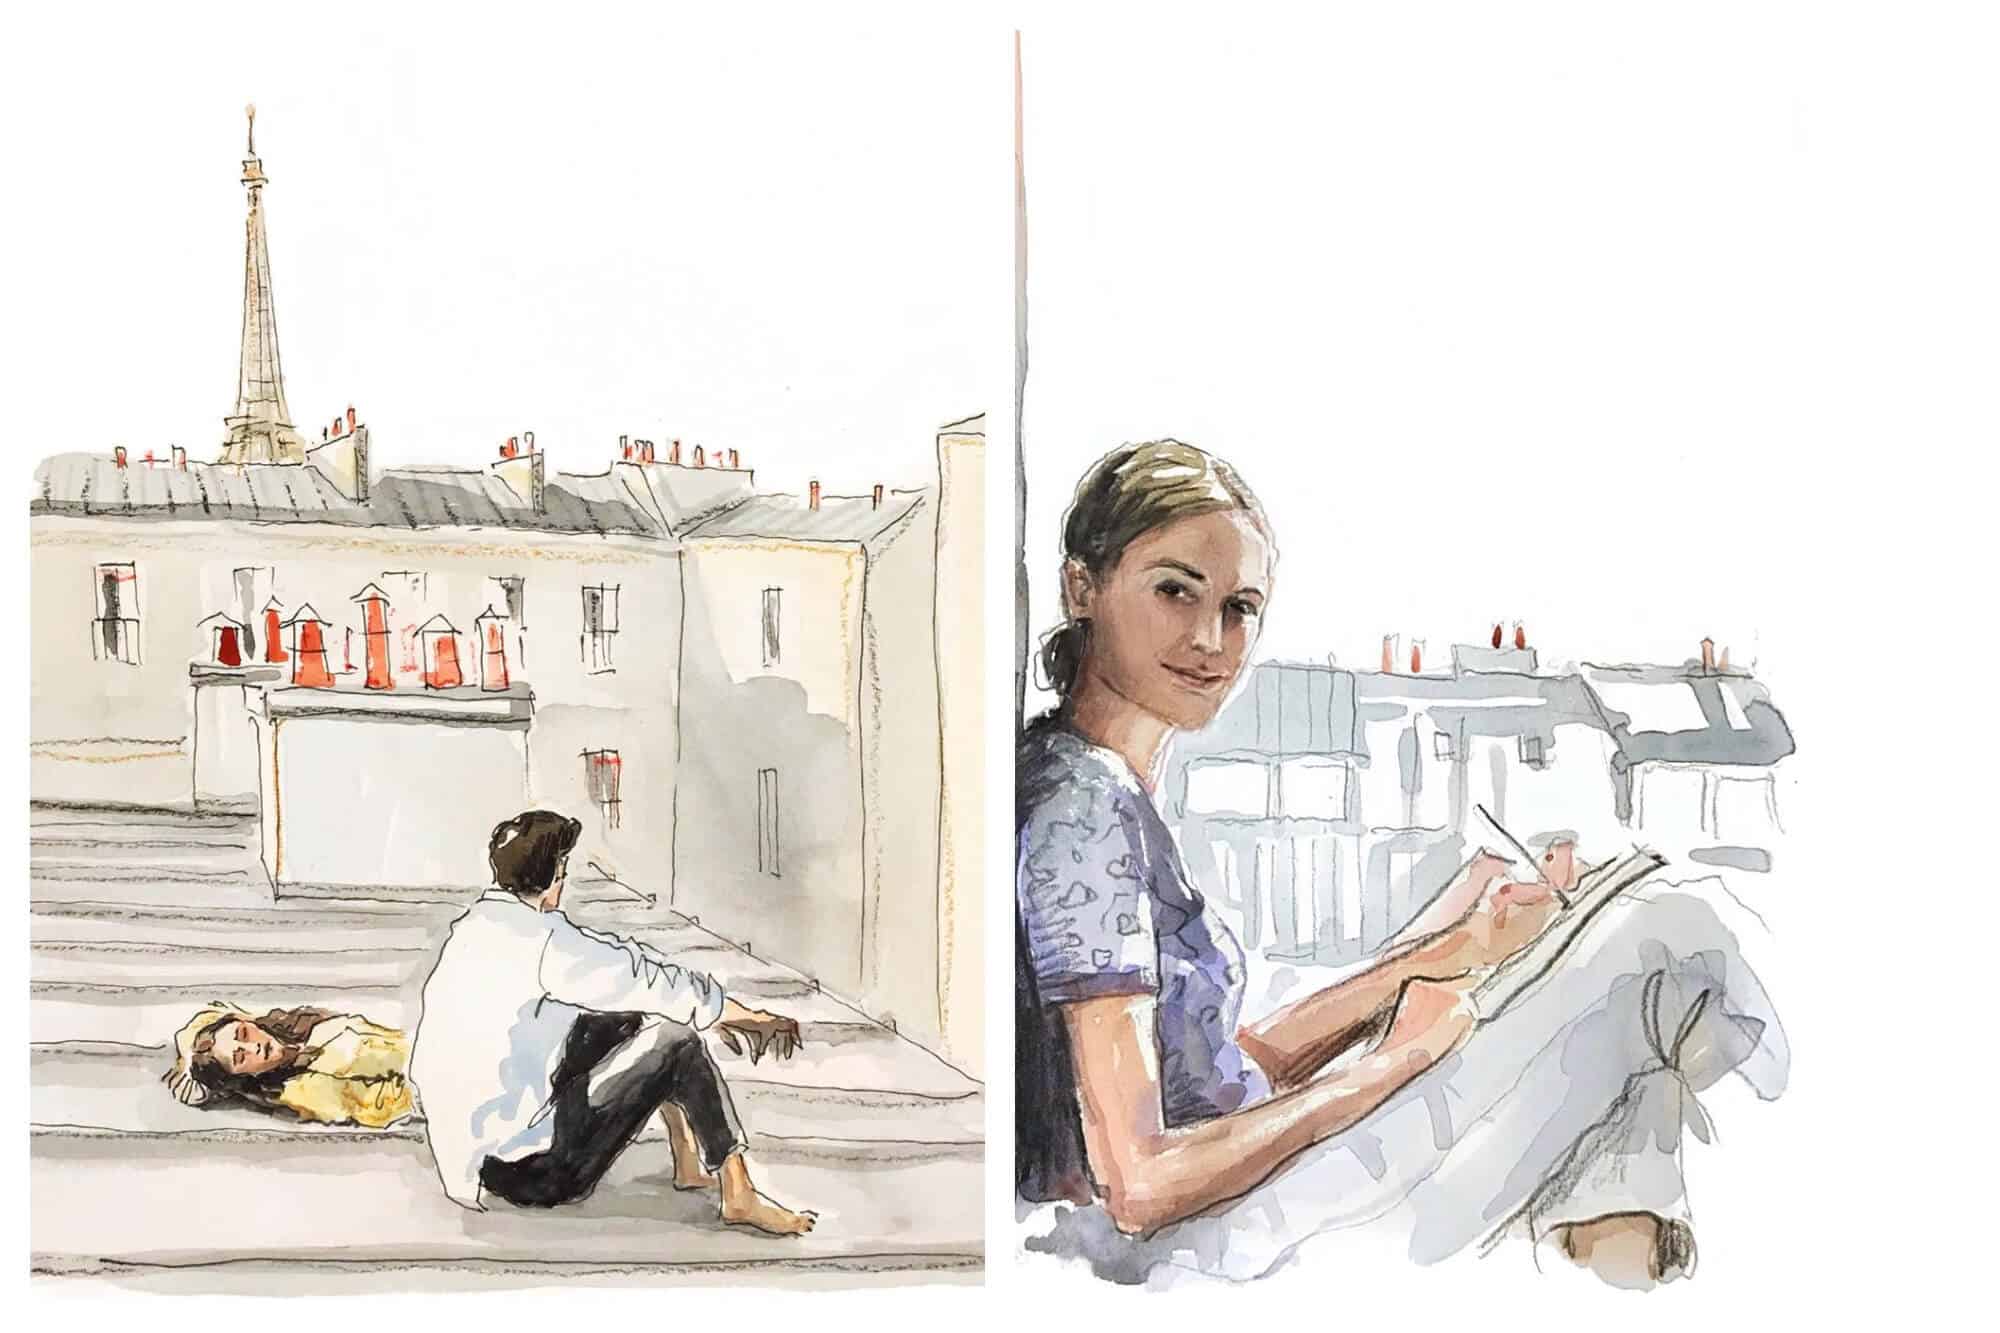 Left: A watercolor painting of a man sitting on a roof with a woman laying next to him with the Eiffel Tower in the background. Right: A watercolor painting of a woman smiling while she paints with gray rooftops behind her.